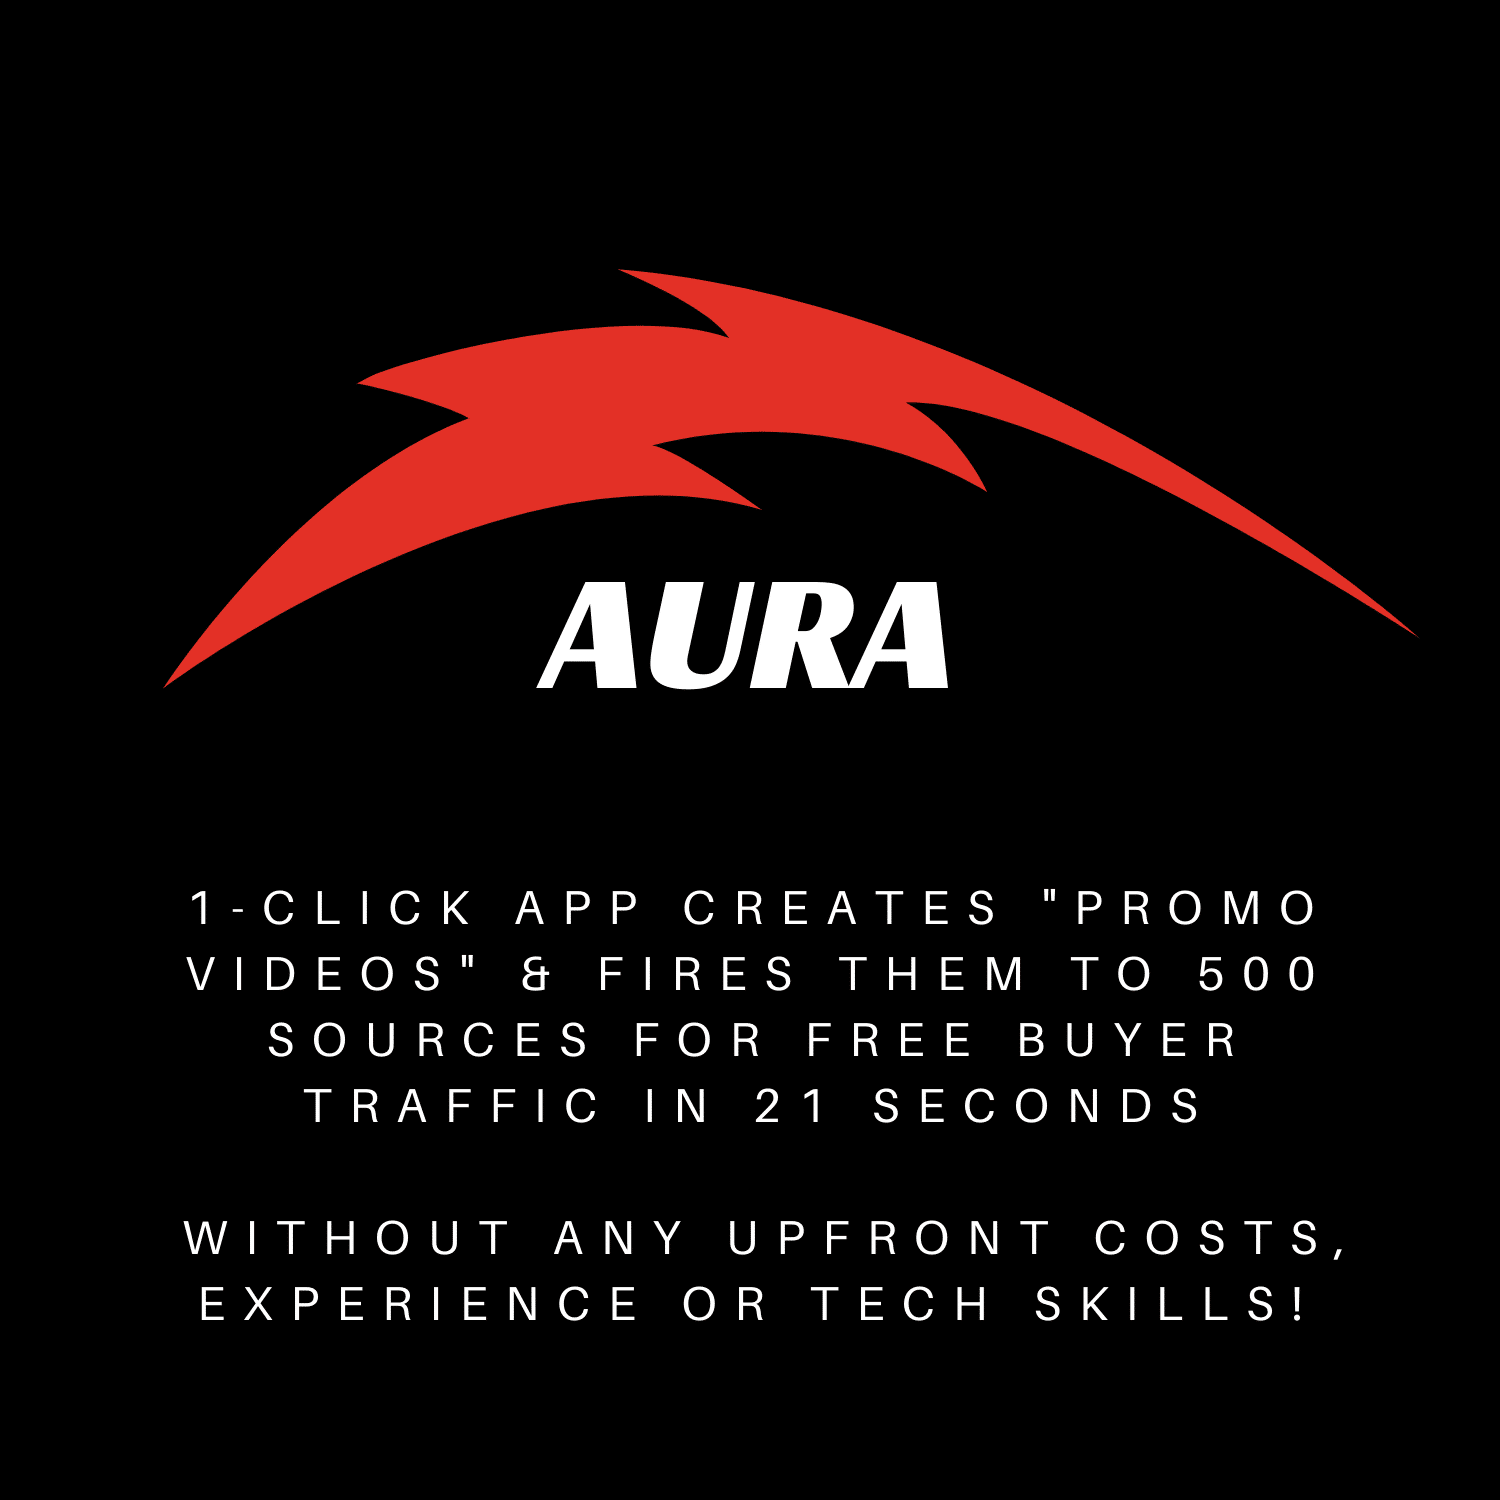 Aura, Promotional Videos In 1 Click Marketersanon without tech skills!